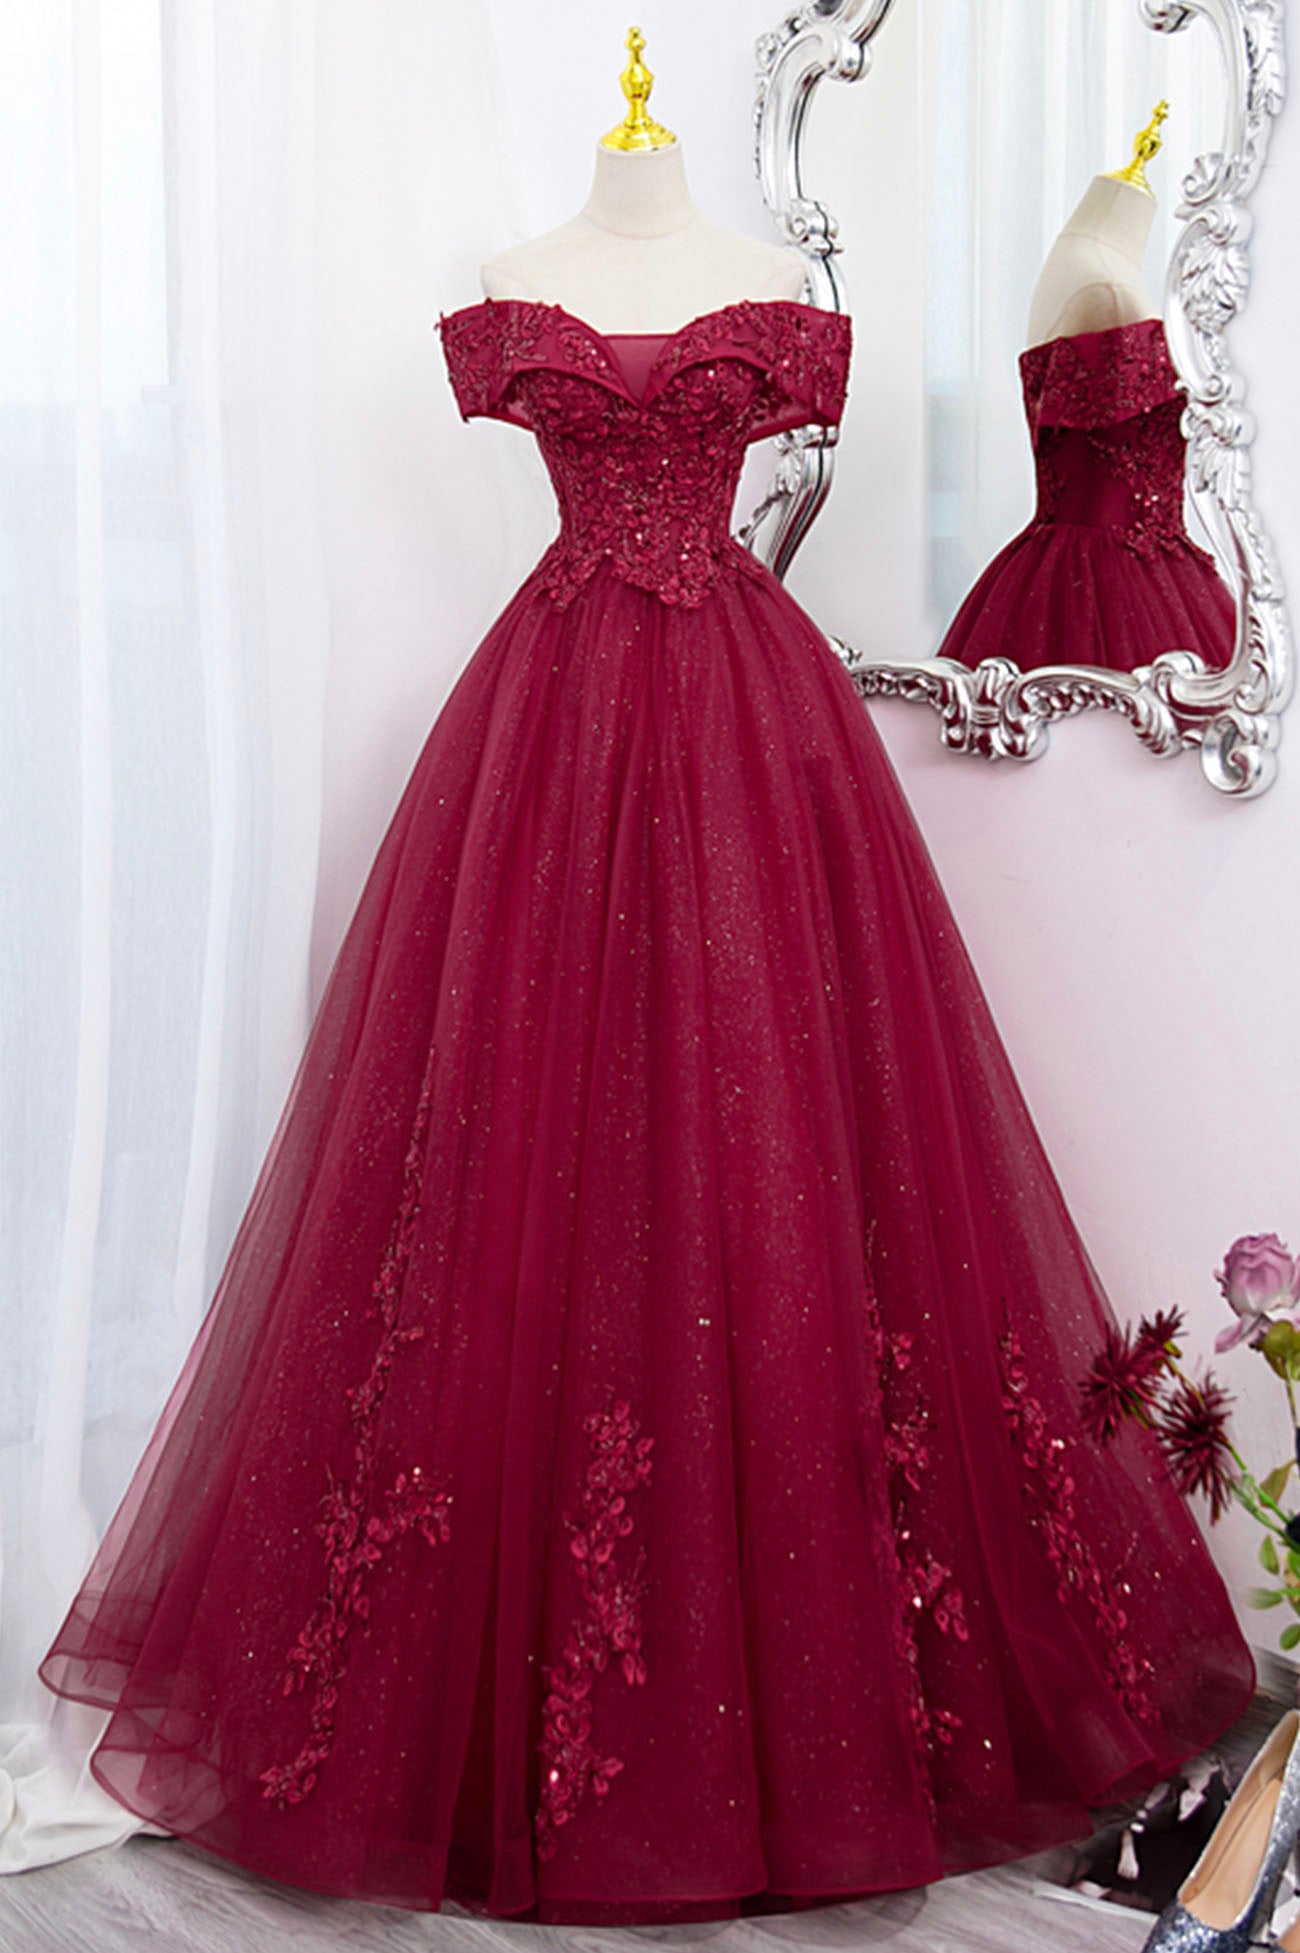 Burgundy Sweet 16 Formal Gown with Lace, Off the Shoulder Prom Dress Party Dress